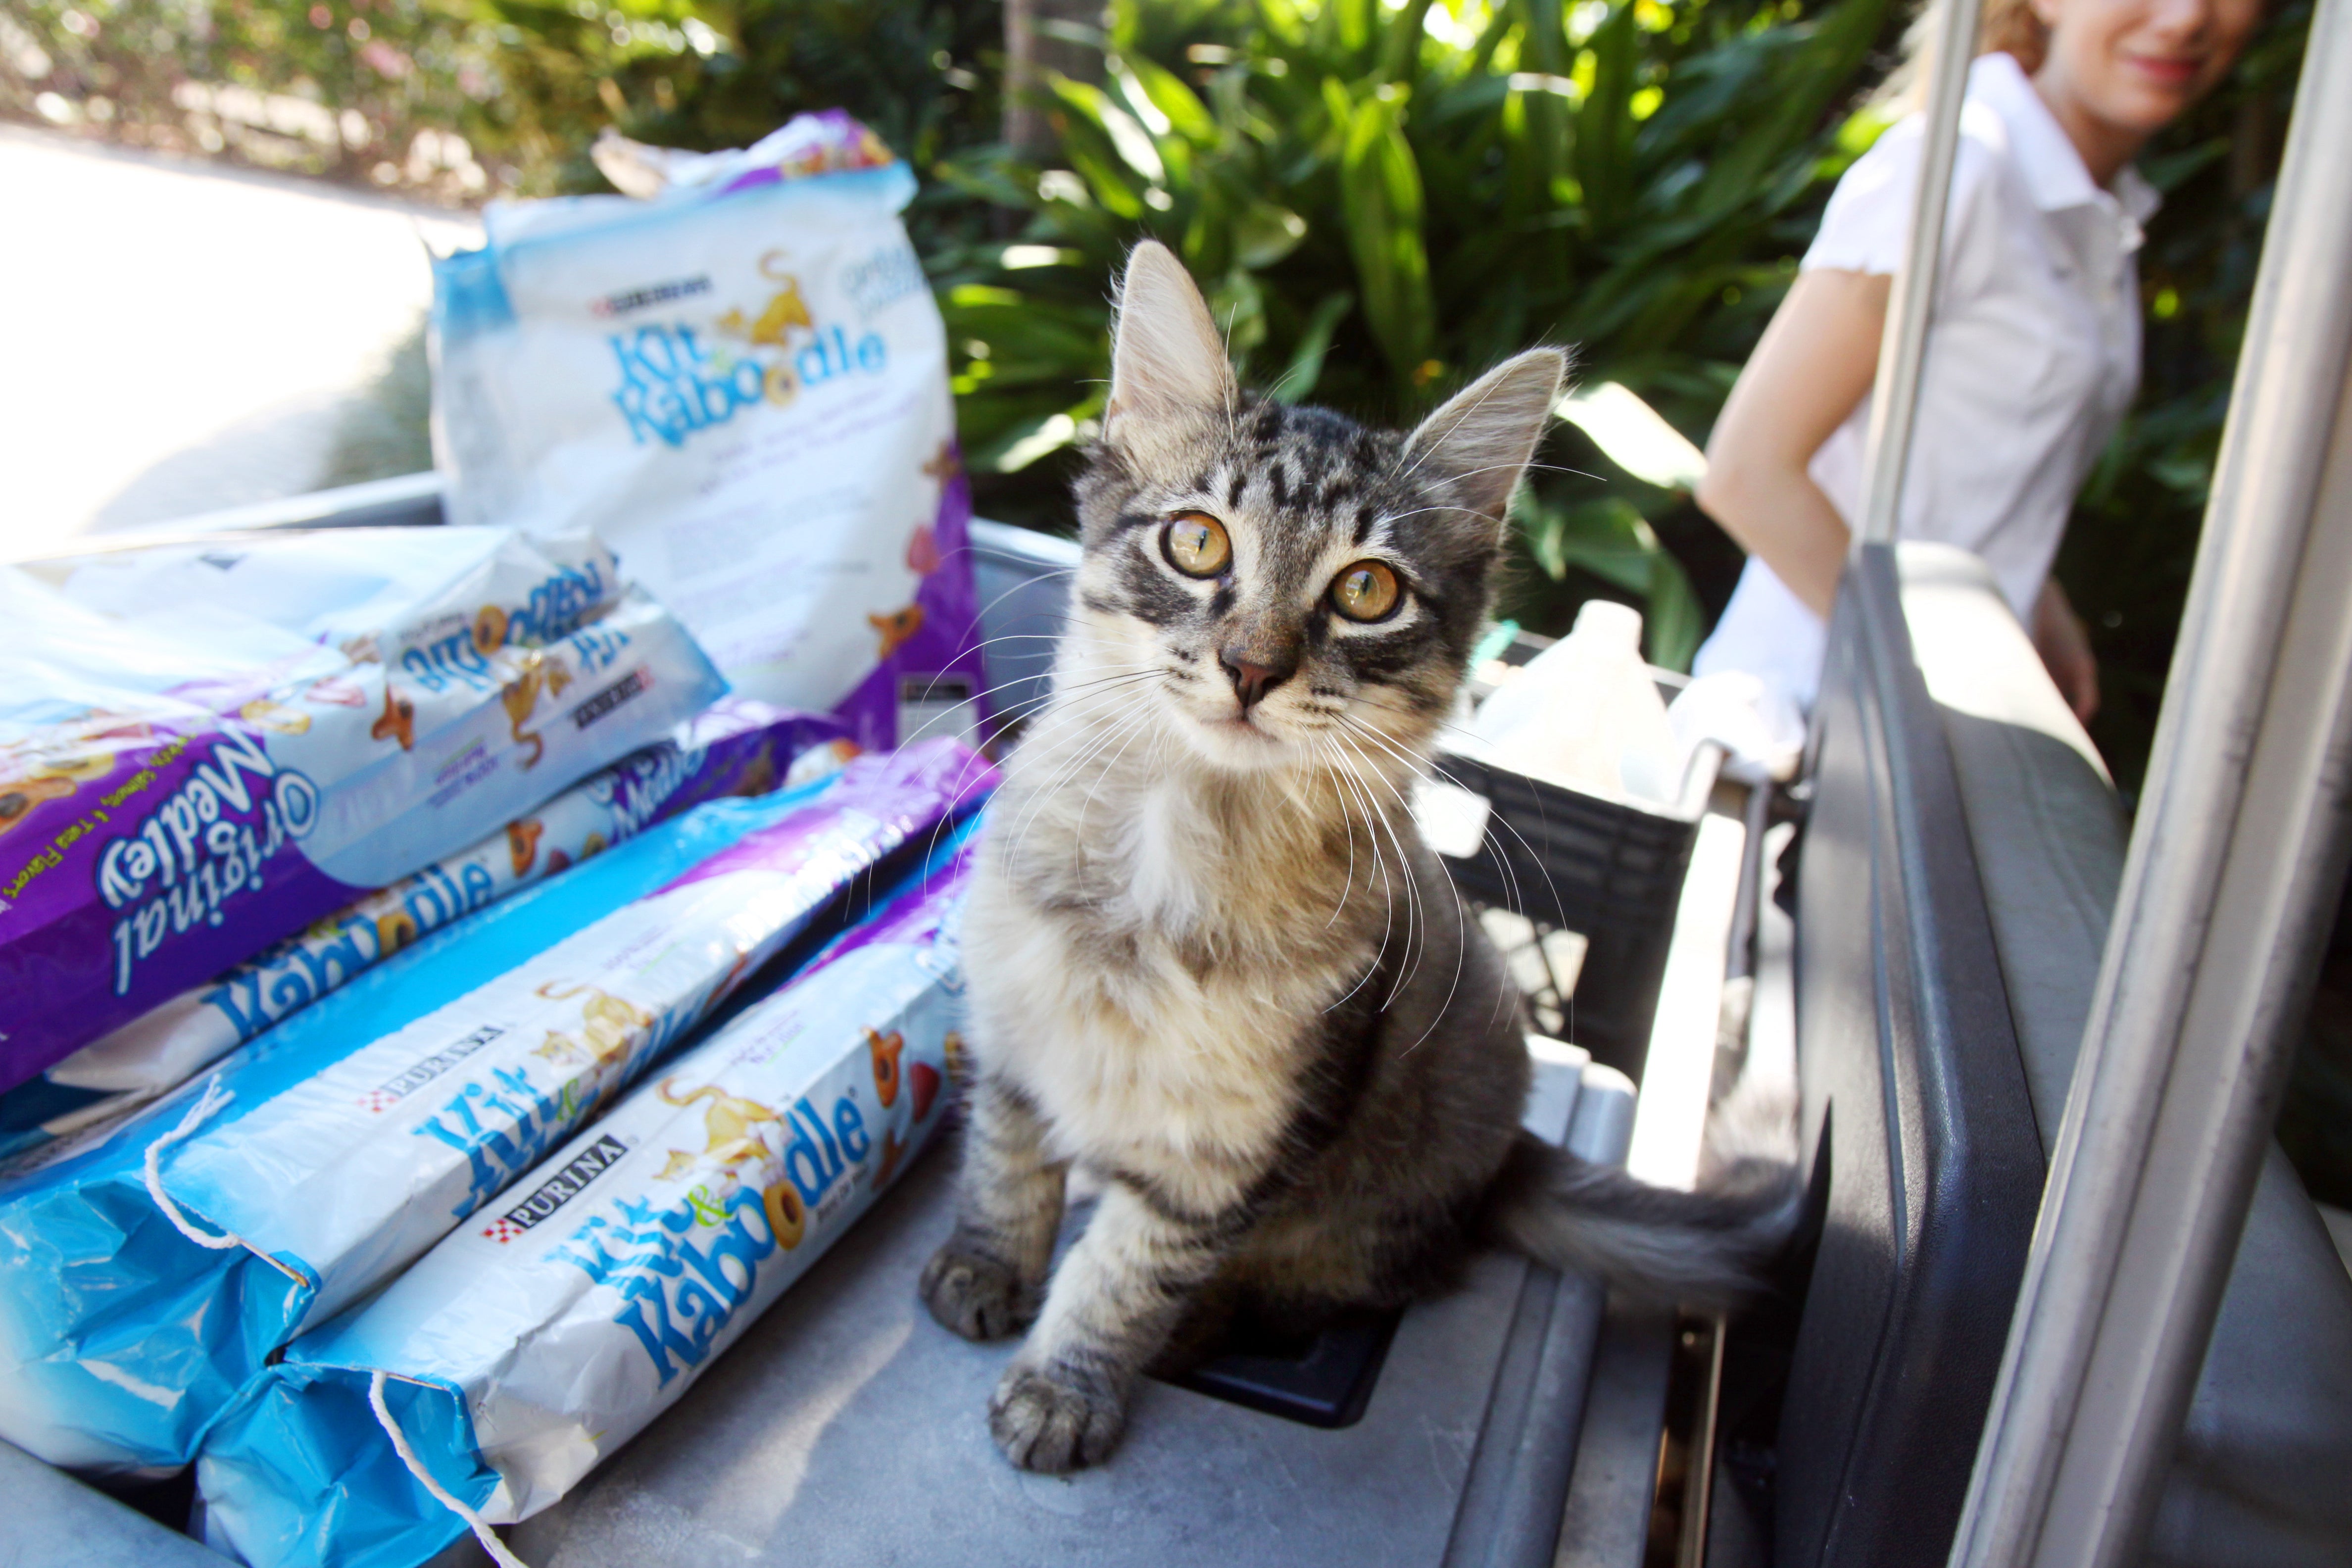 Kitten sitting next to bags of cat food